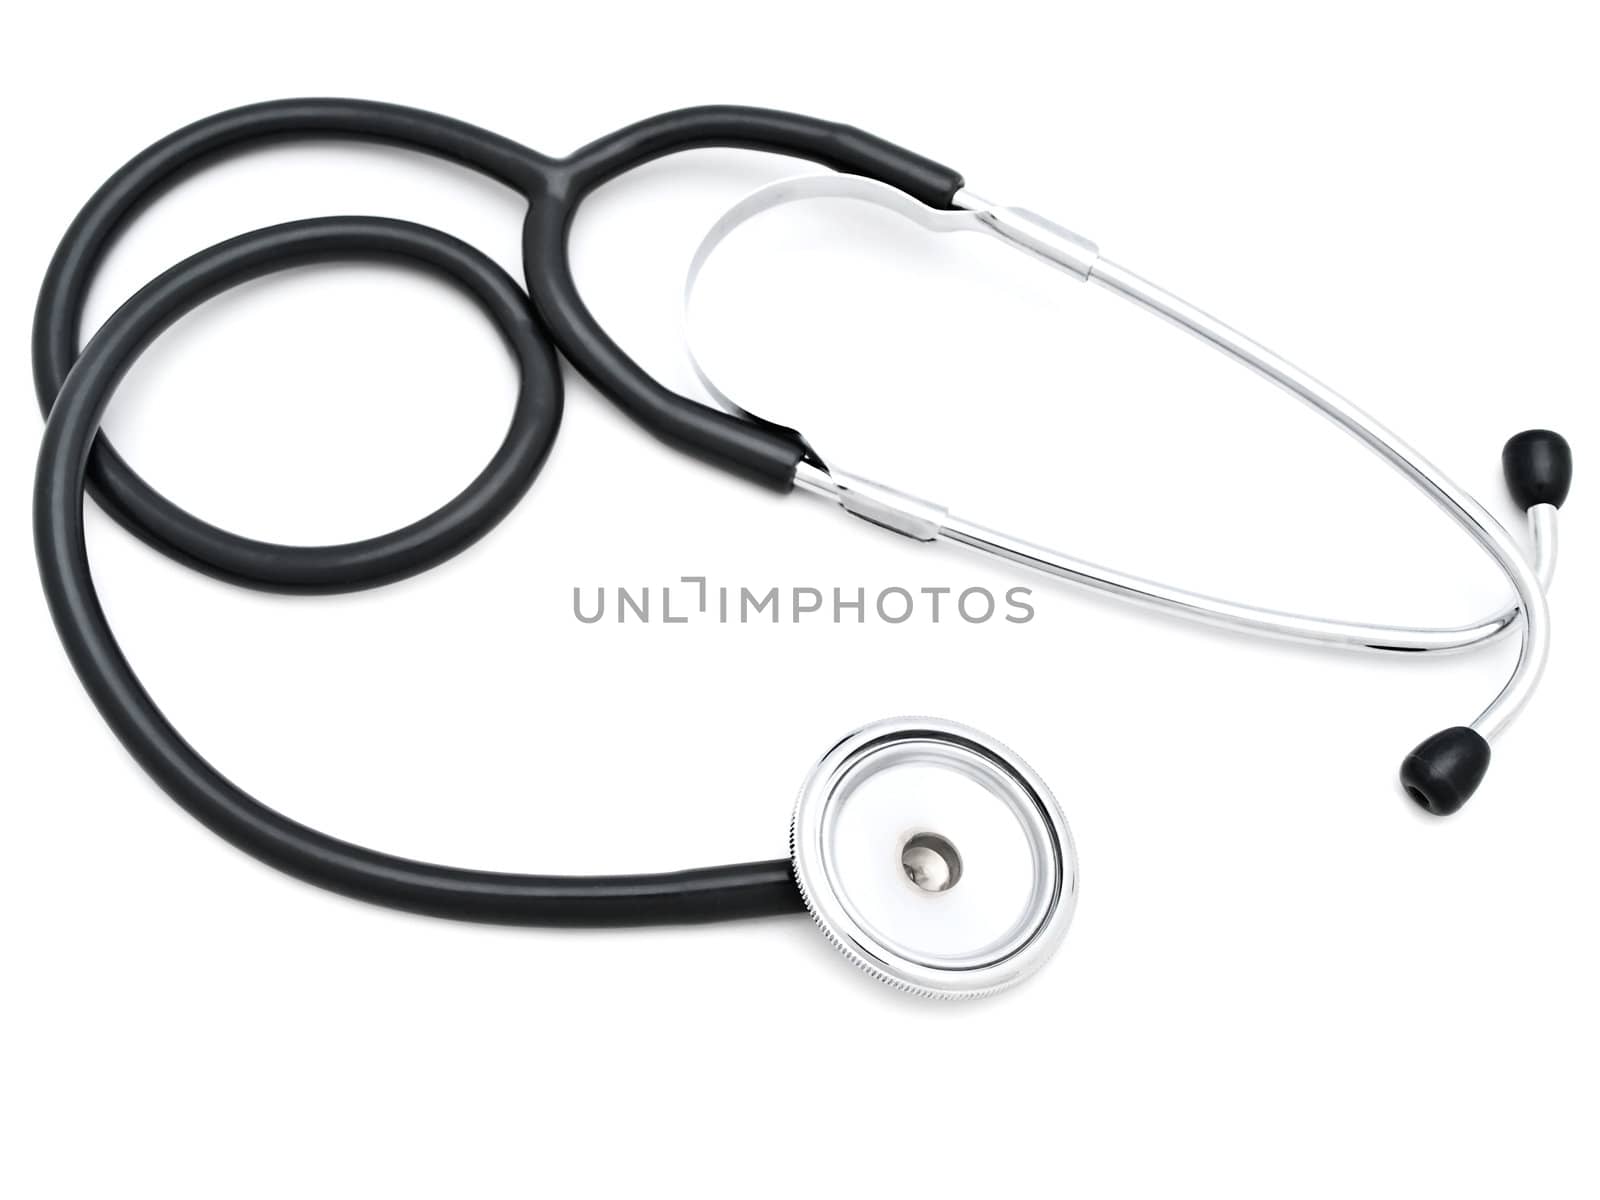 stethoscope over the white background 